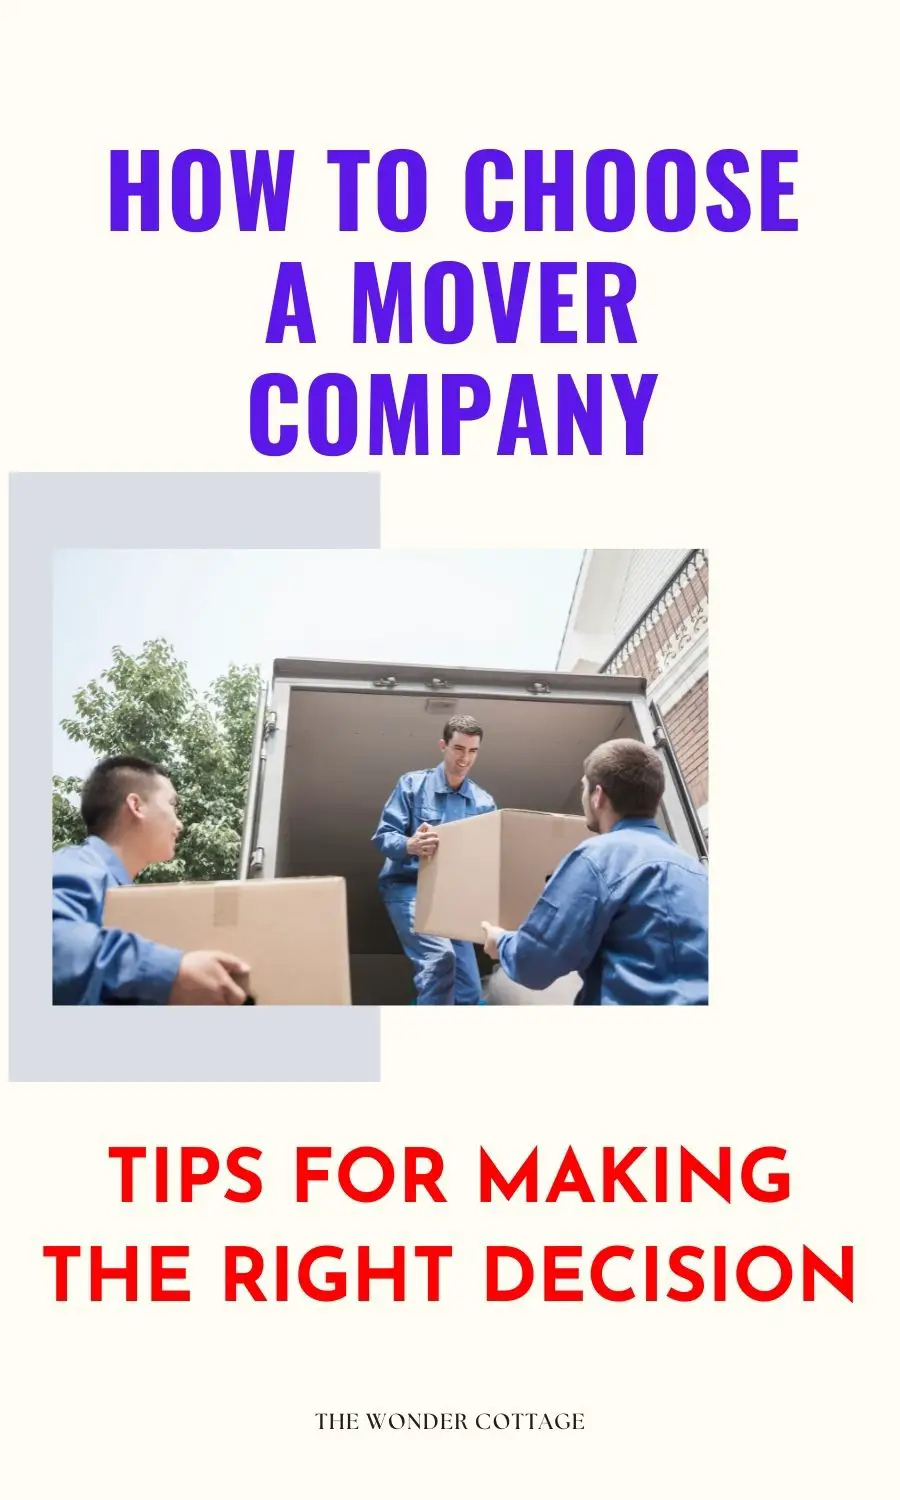 How To Choose A Mover Company: Tips For Making The Right Decision